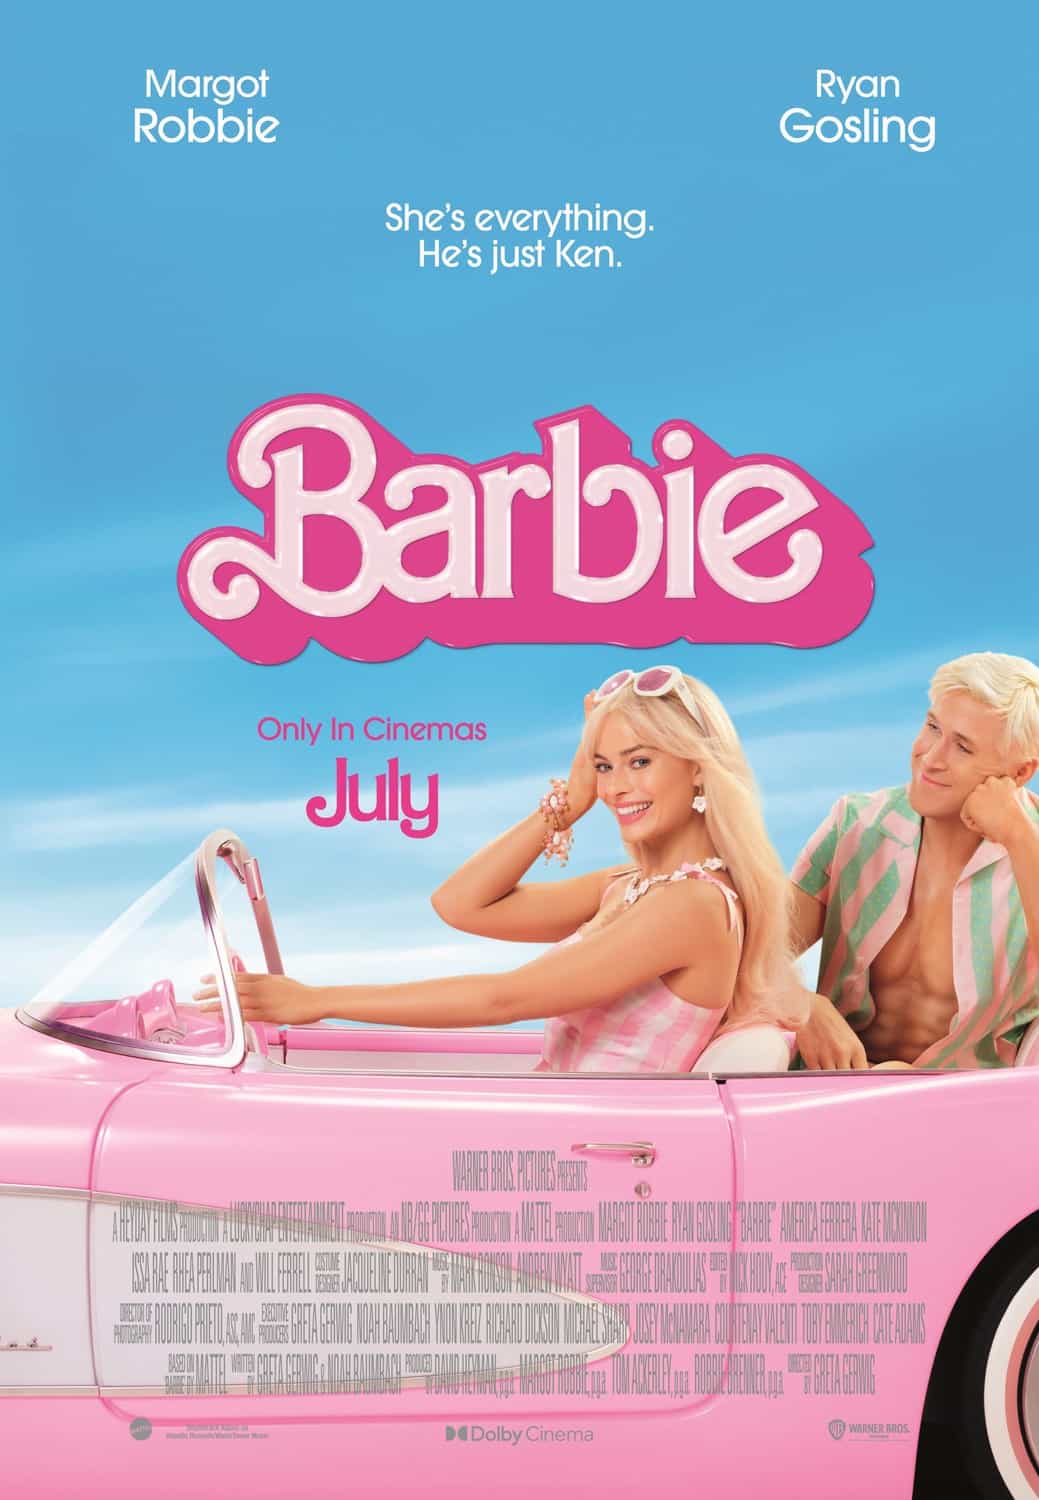 Check out the new trailer for upcoming movie Barbie which stars Margot Robbie and Ryan Gosling - movie UK release date 21st July 2023 #barbie